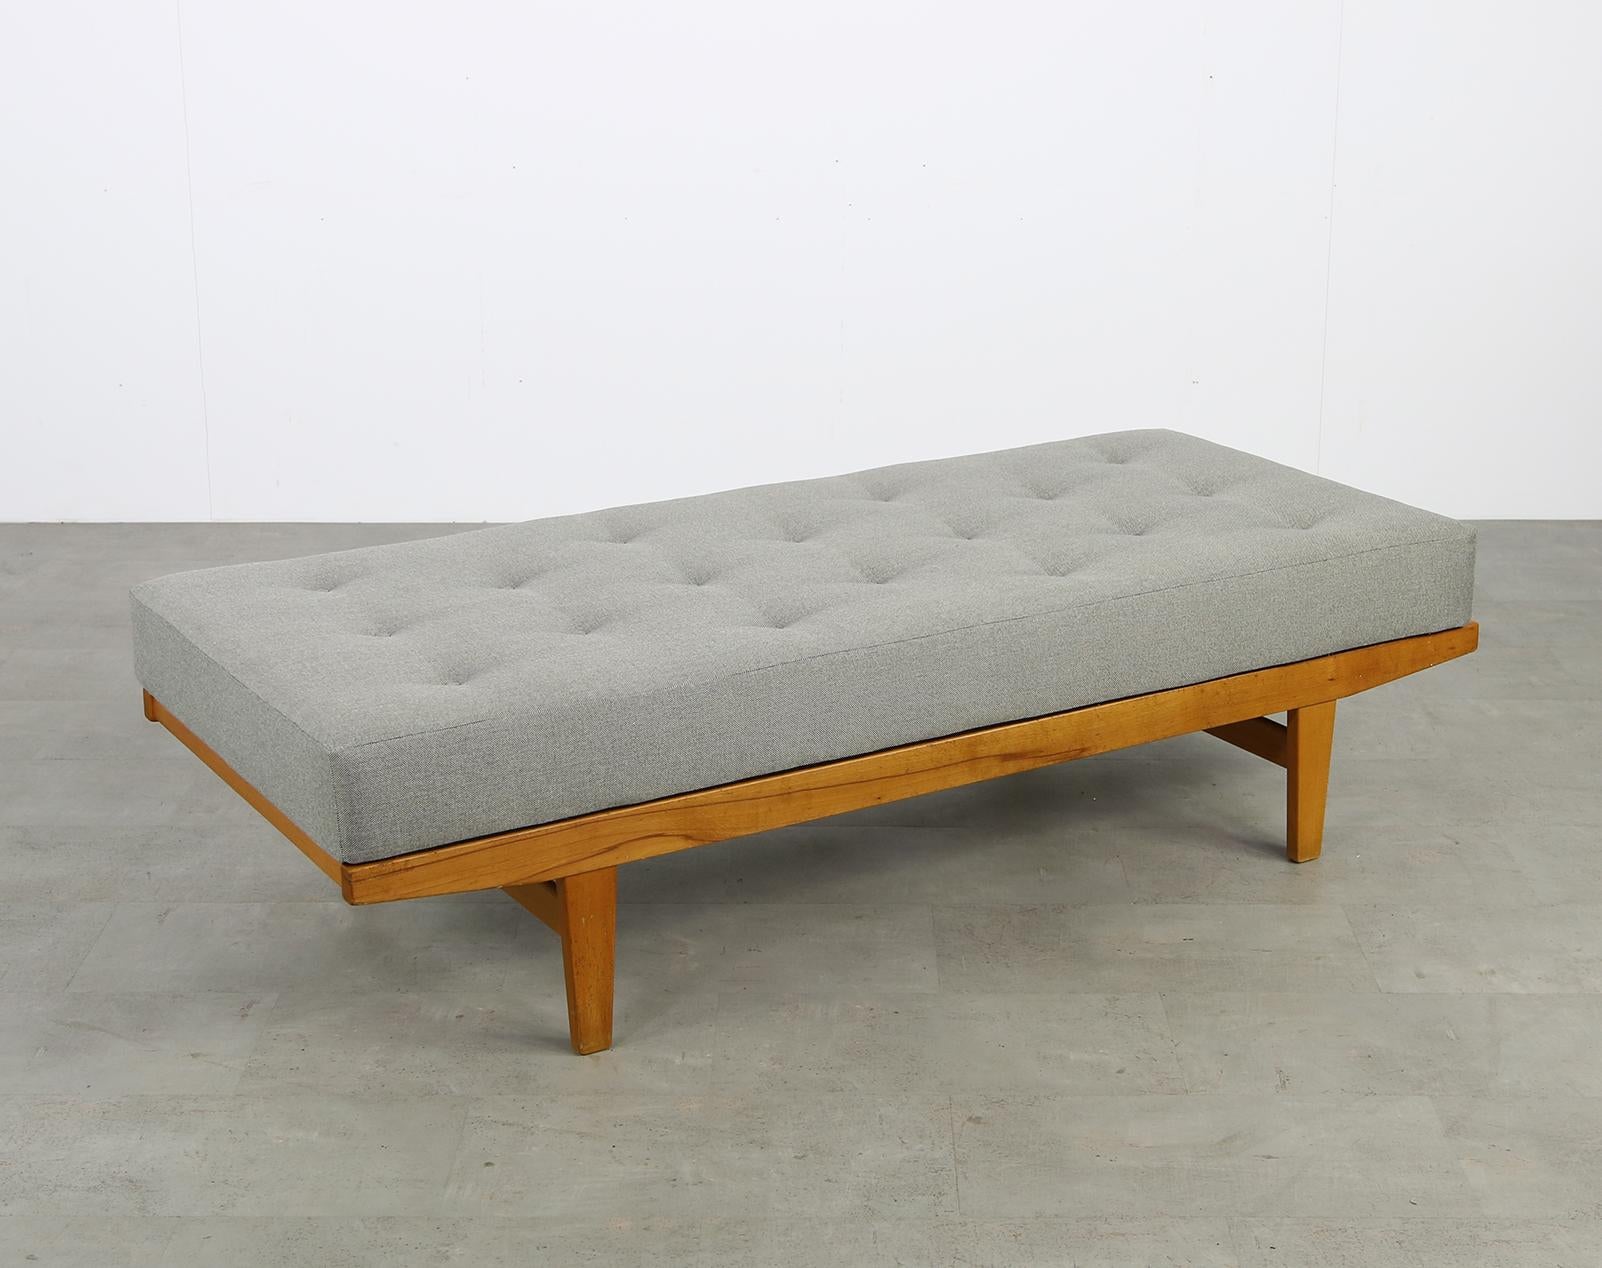 Amazing 1960s rare Poul M. Volther daybed, for FDB Mobler, Denmark, Model H9 in a very good condition, the mattress was renewed and covered with new, woven fabric in a grey tone. The beech wood frame is in a great vintage condition.